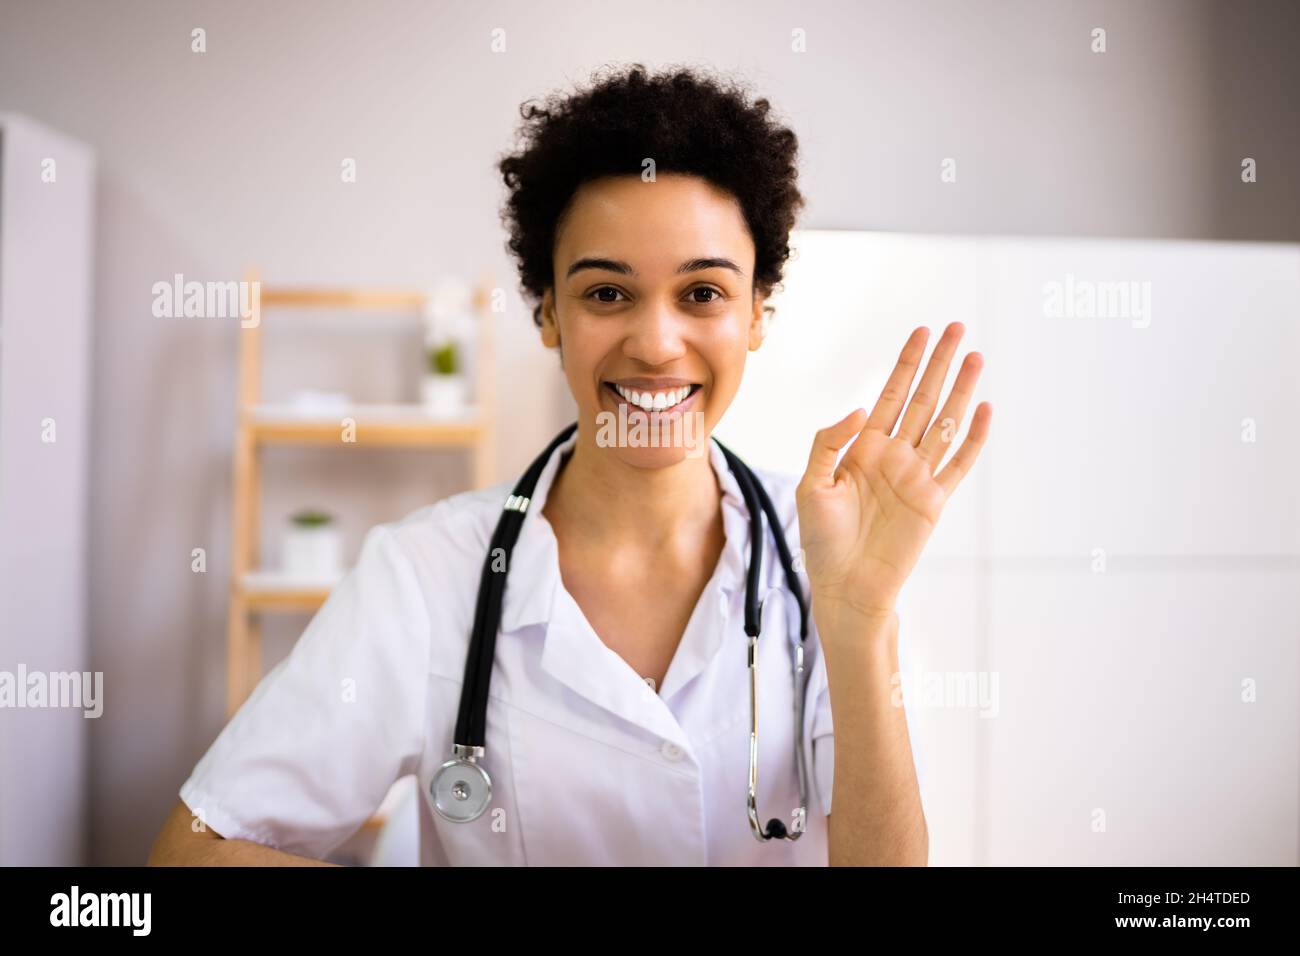 African Nurse Or Doctor Using Video Conference Stock Photo